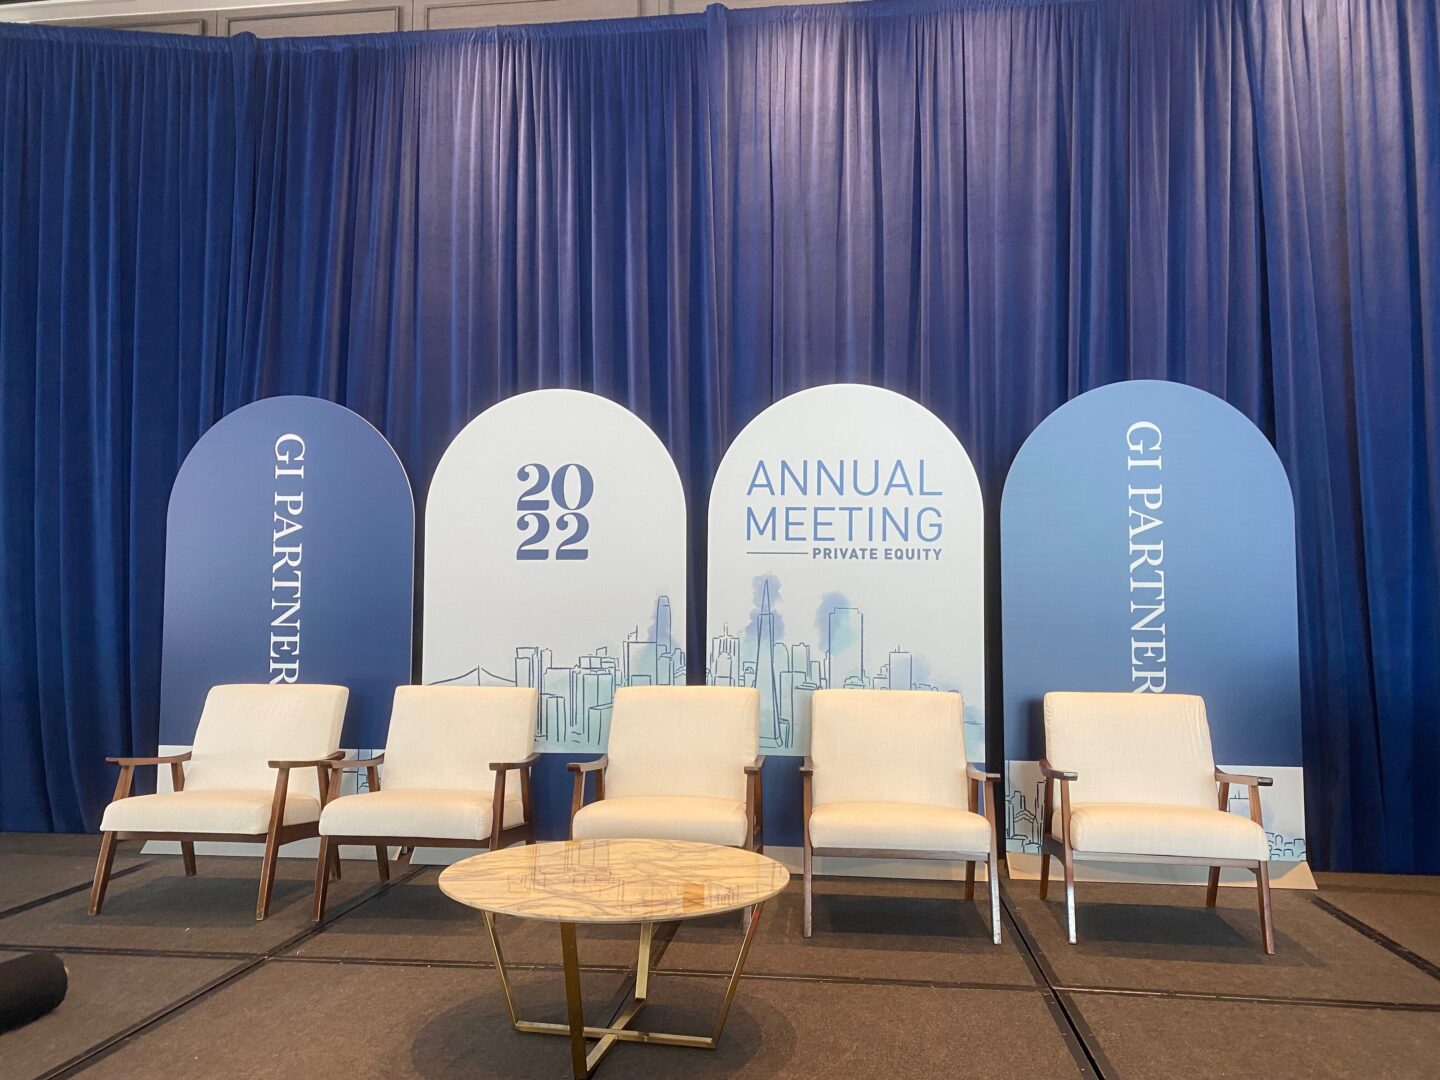 A group of chairs and tables in front of a wall with the names of the event.